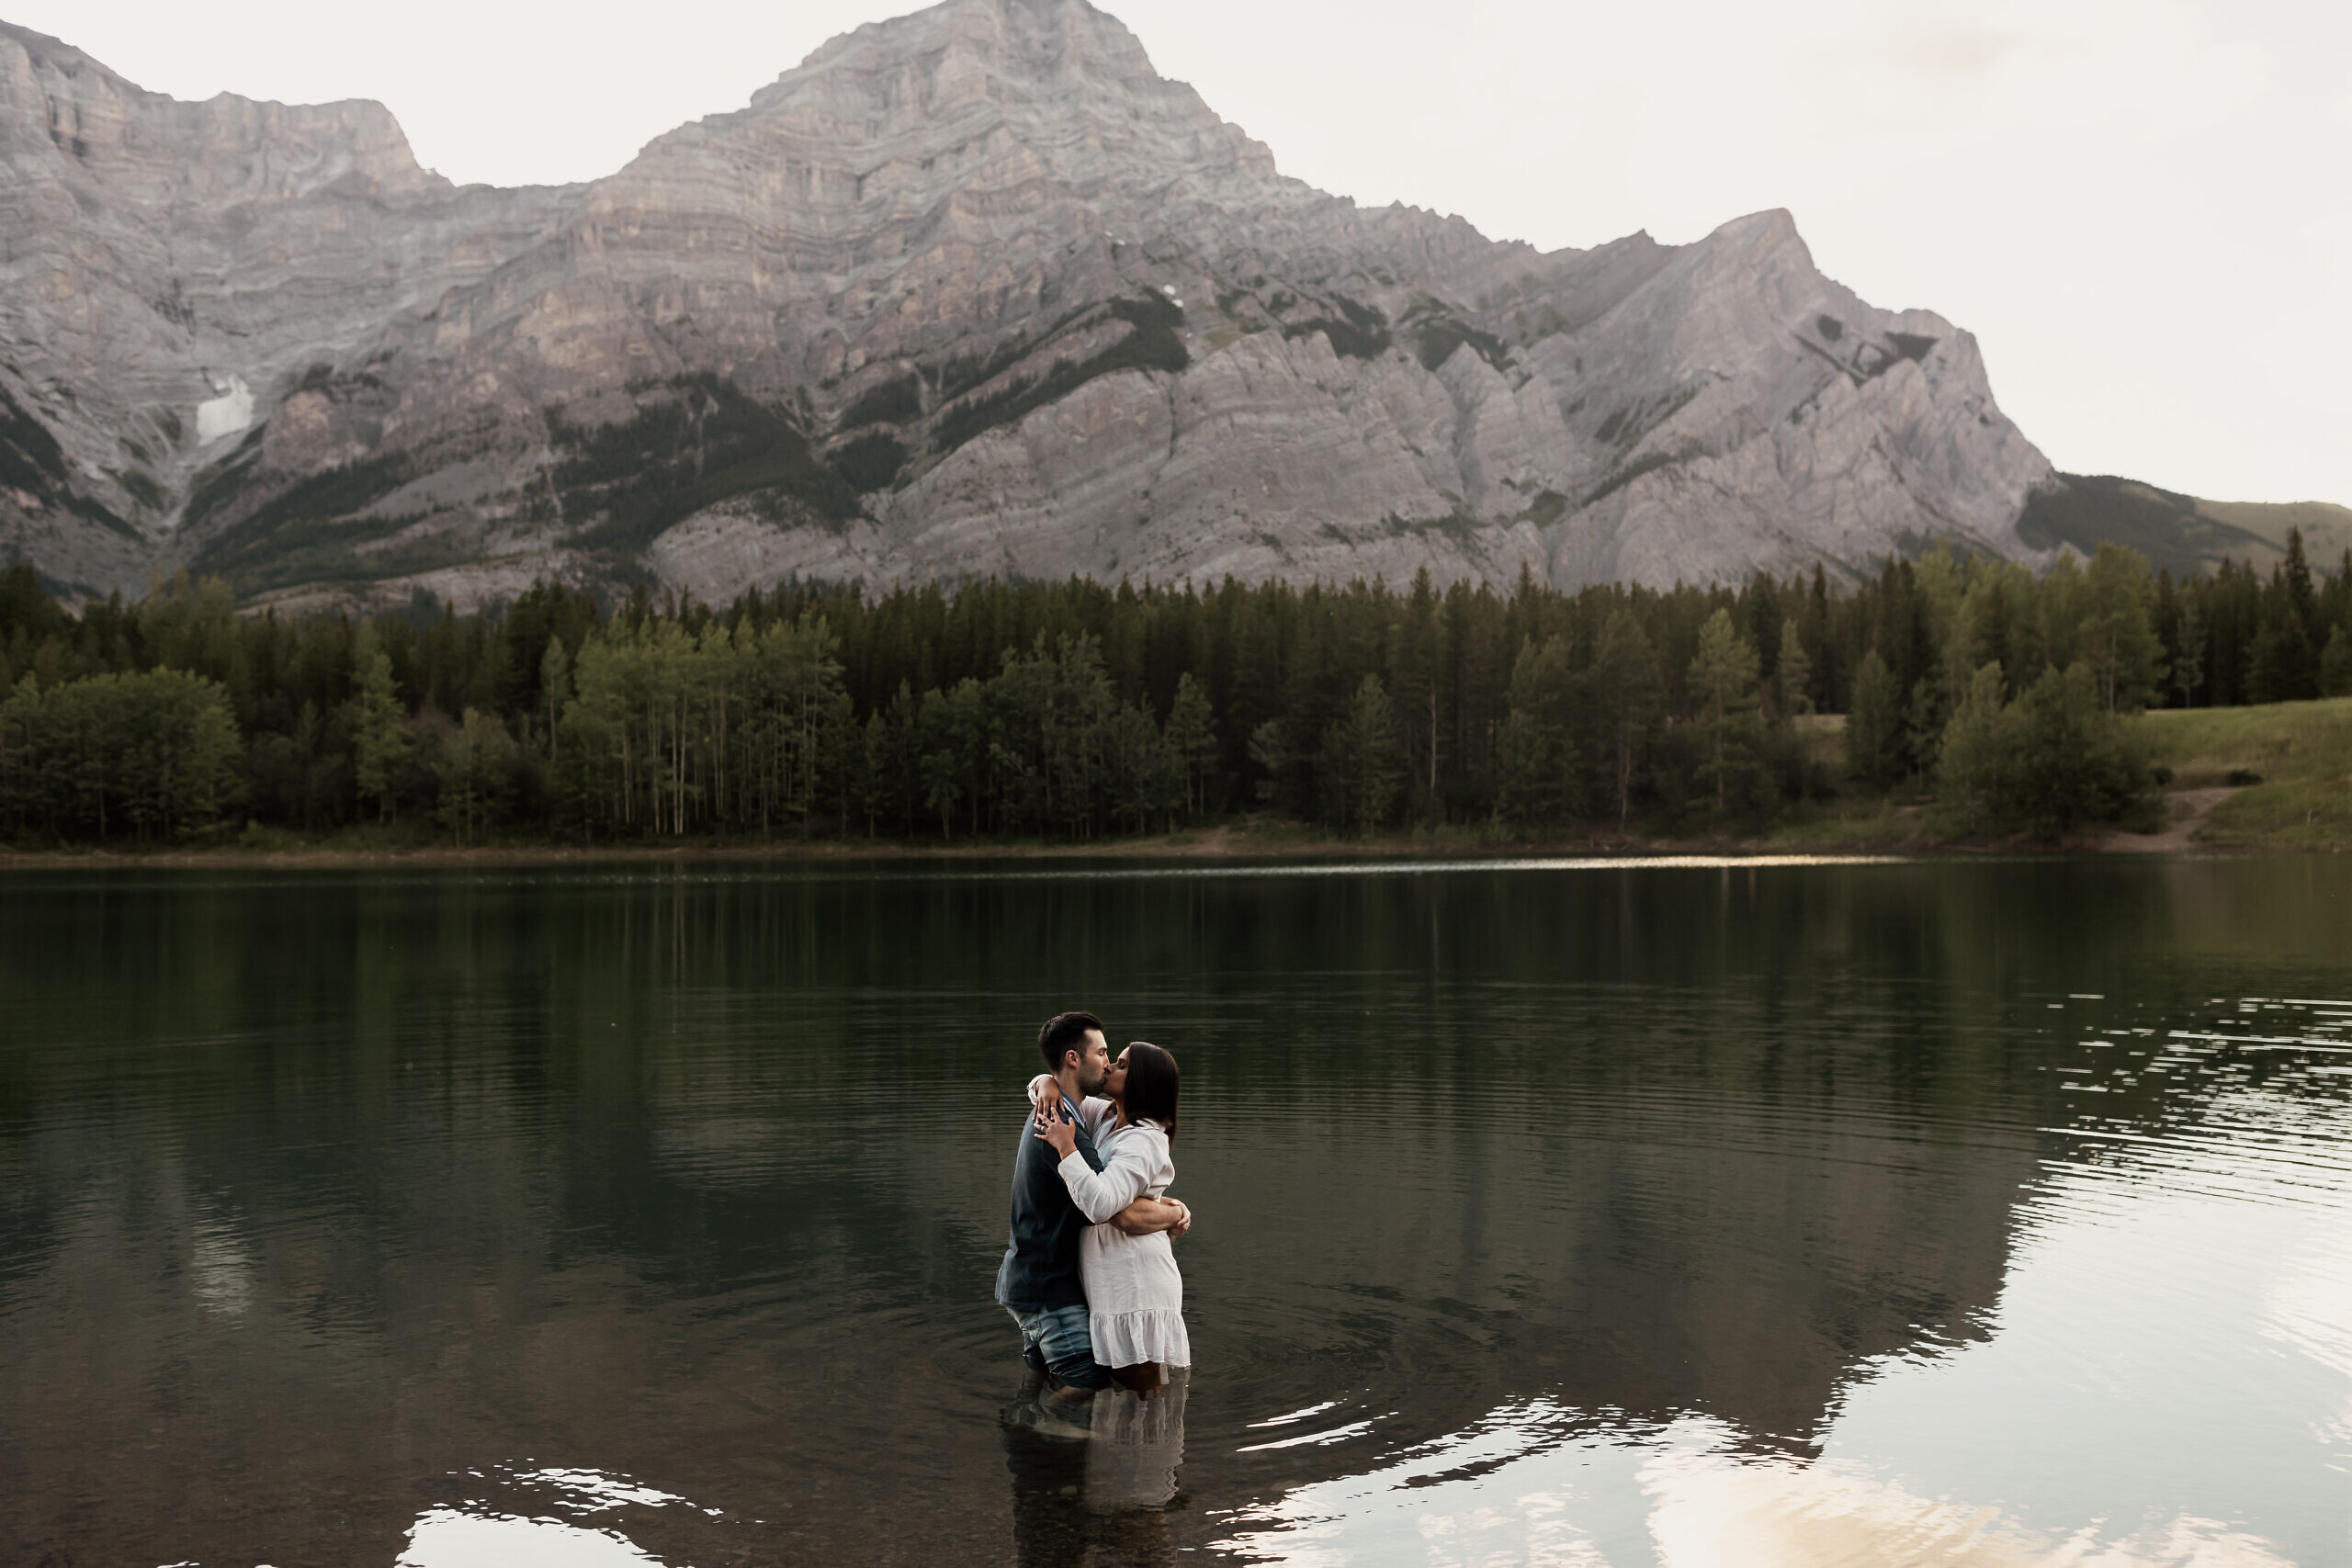 Couple share a kiss in the water at wedge pond in kananaskis